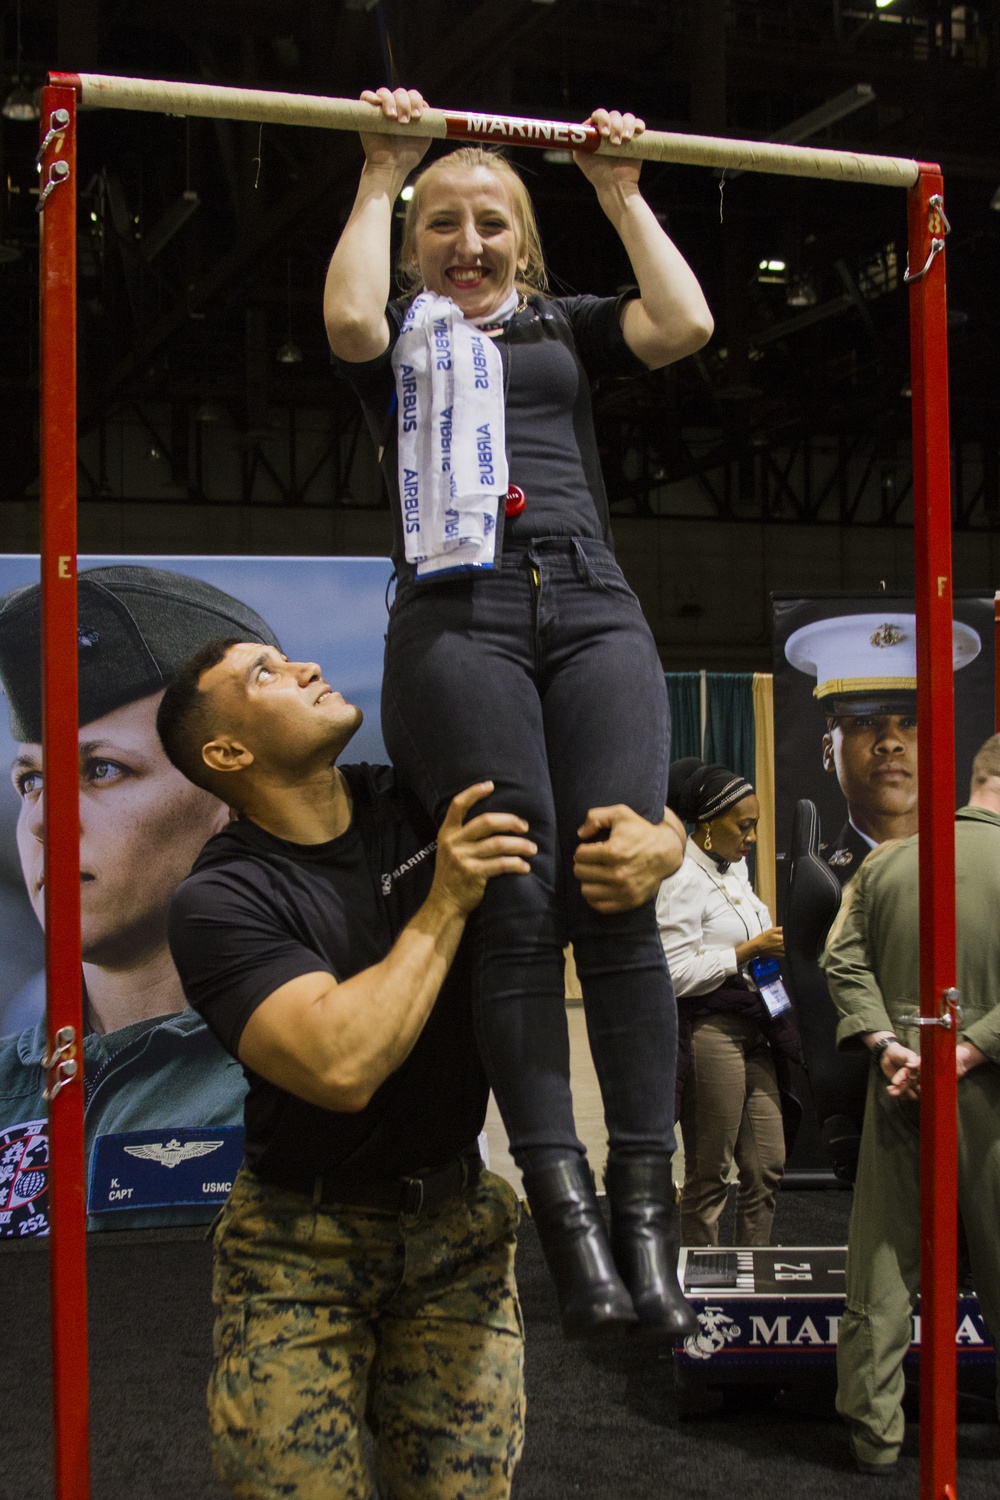 Marines engage with female aviation enthusiasts at WAI